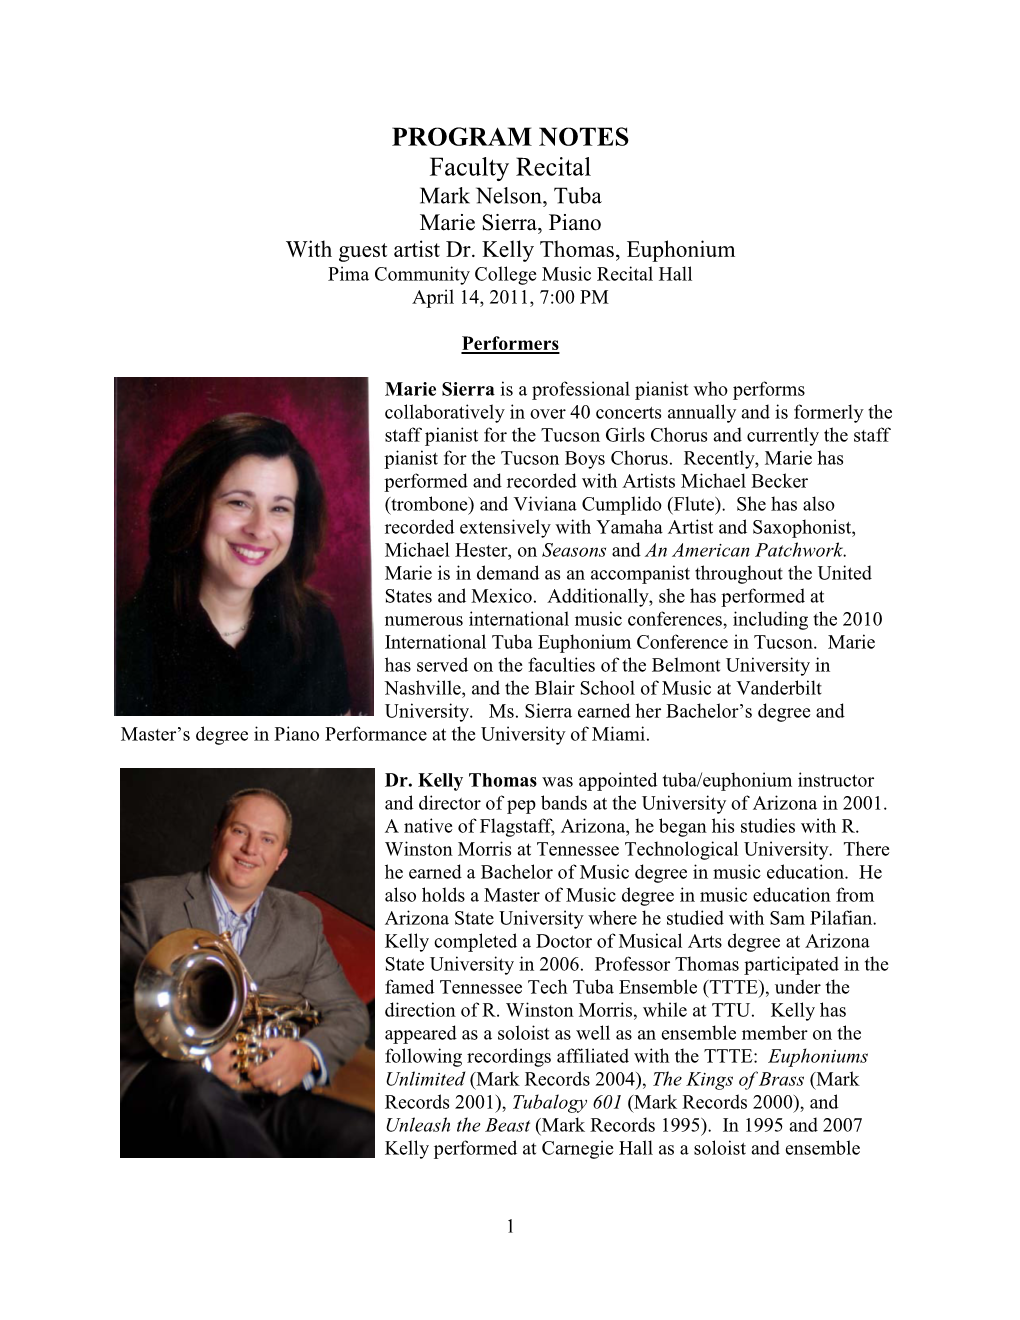 PROGRAM NOTES Faculty Recital Mark Nelson, Tuba Marie Sierra, Piano with Guest Artist Dr